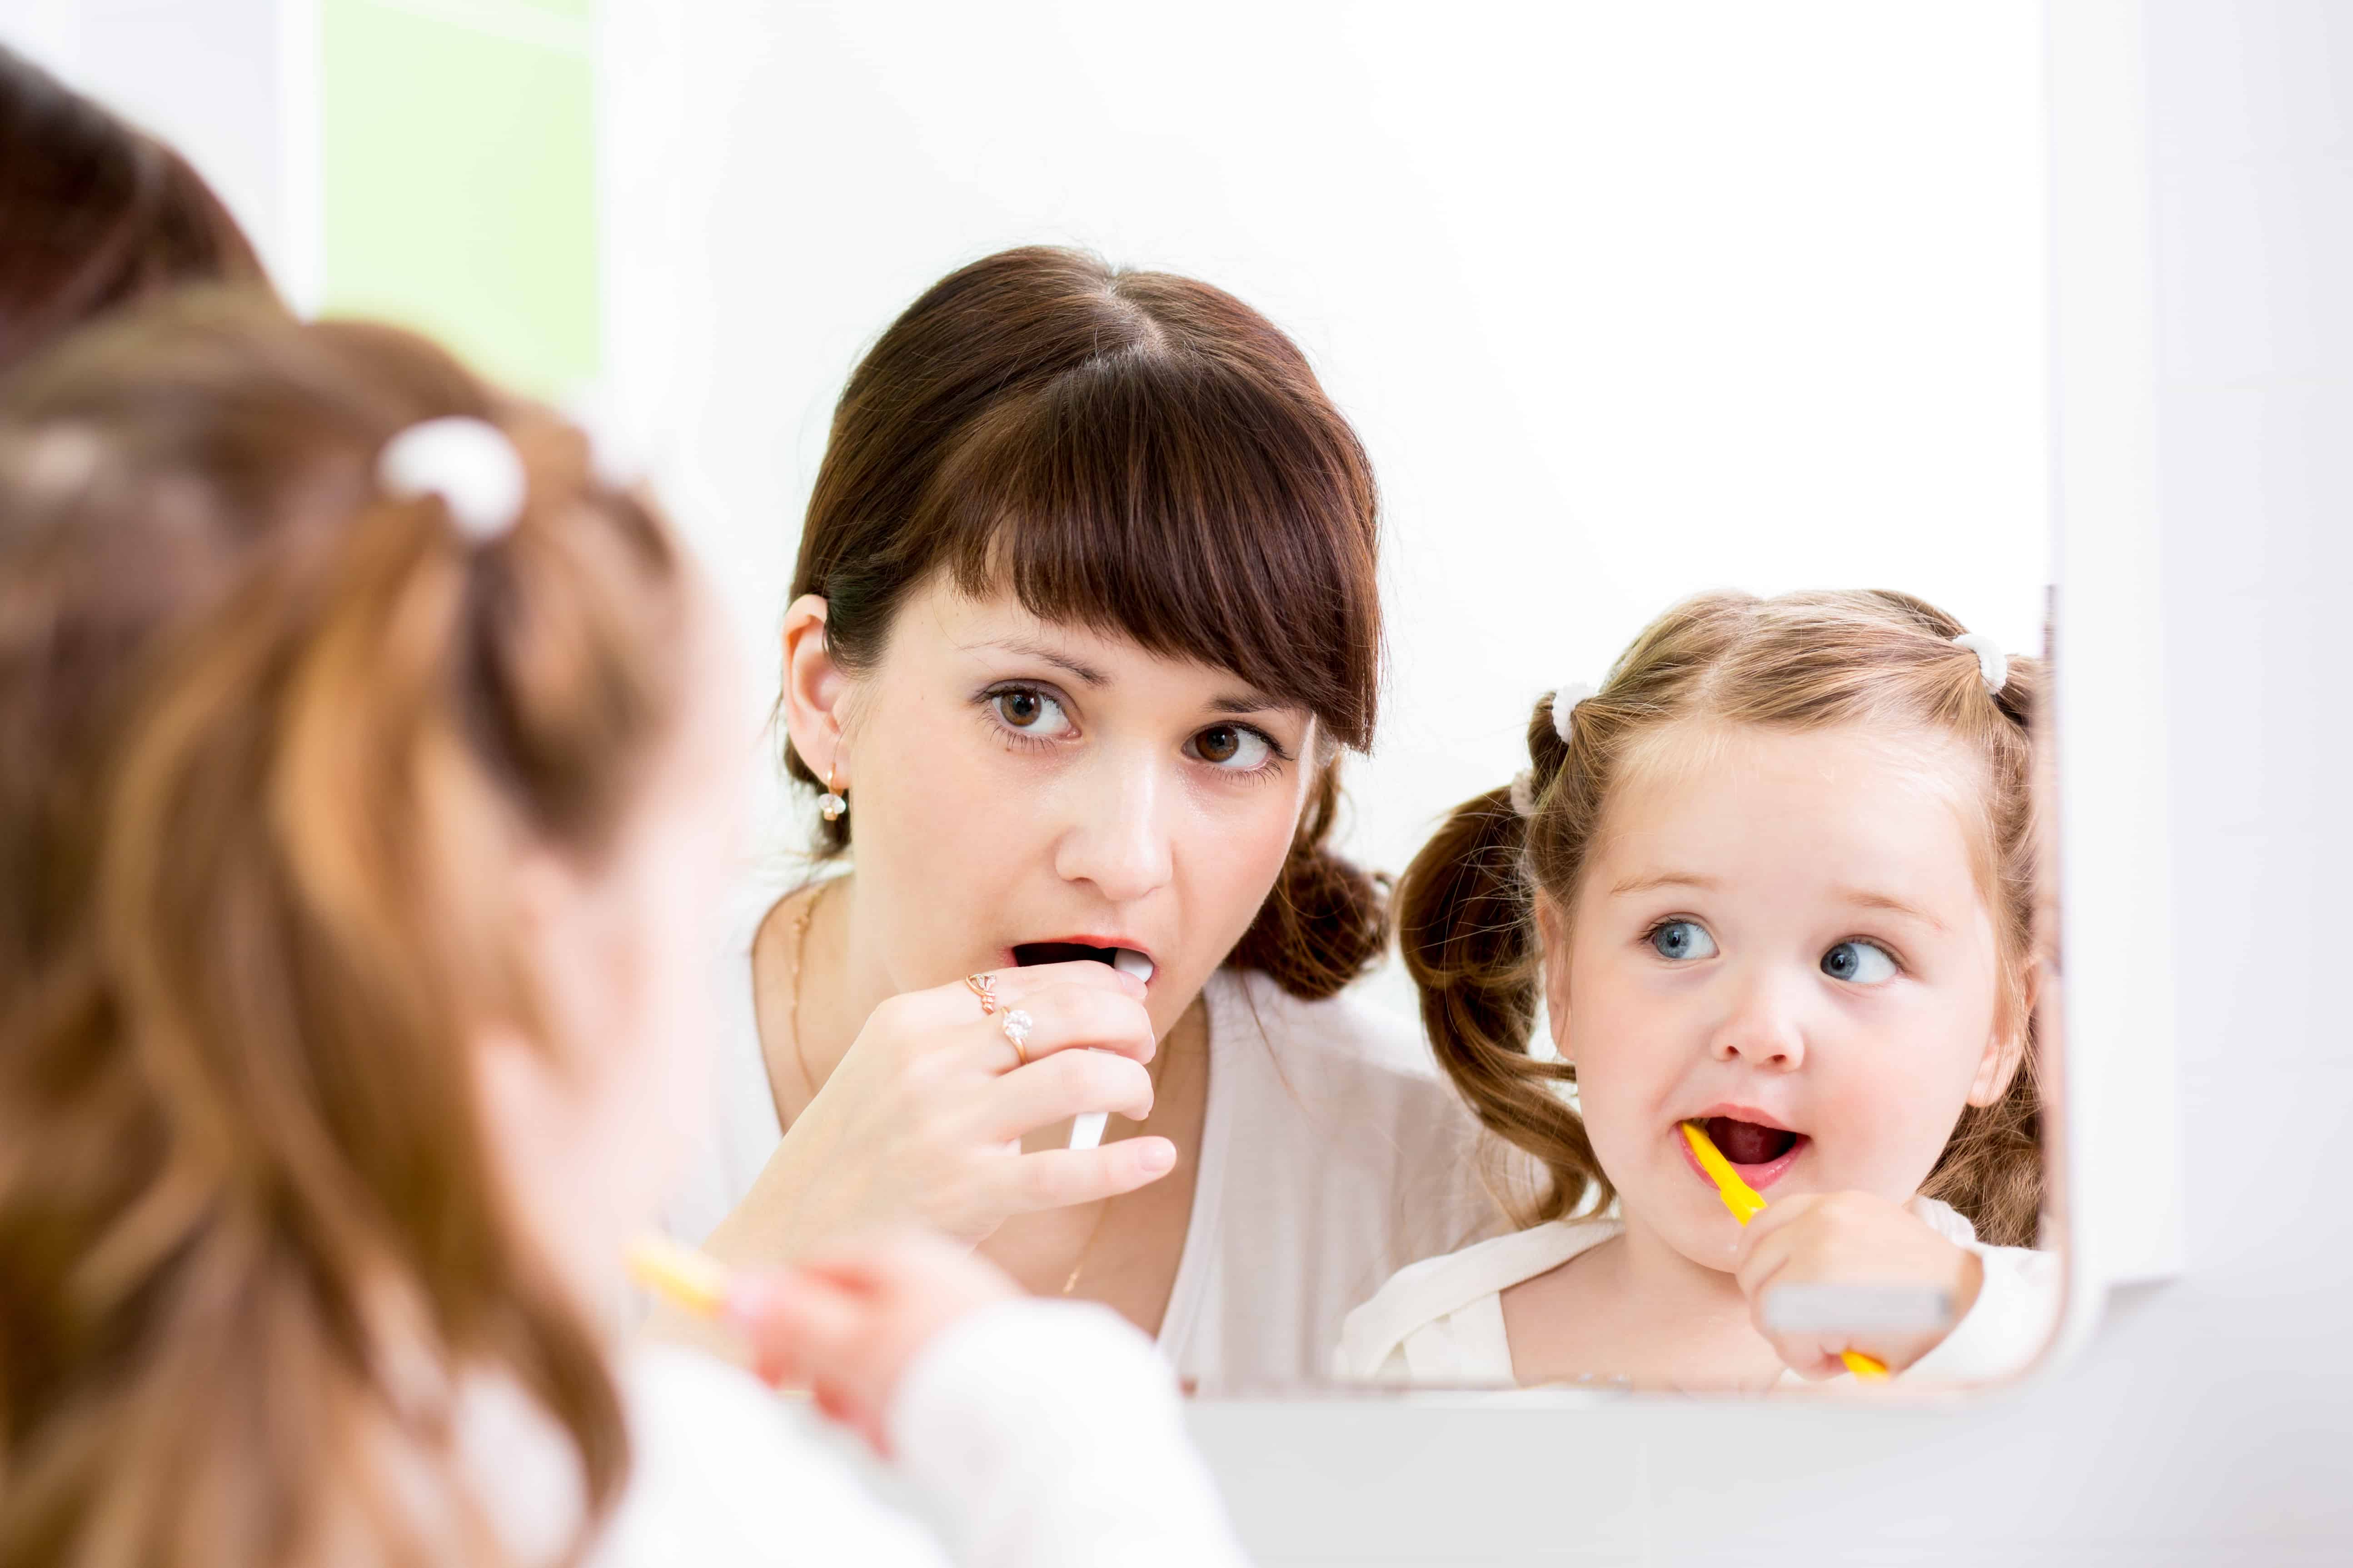 Teaching Young Children Good Oral Hygiene Habits